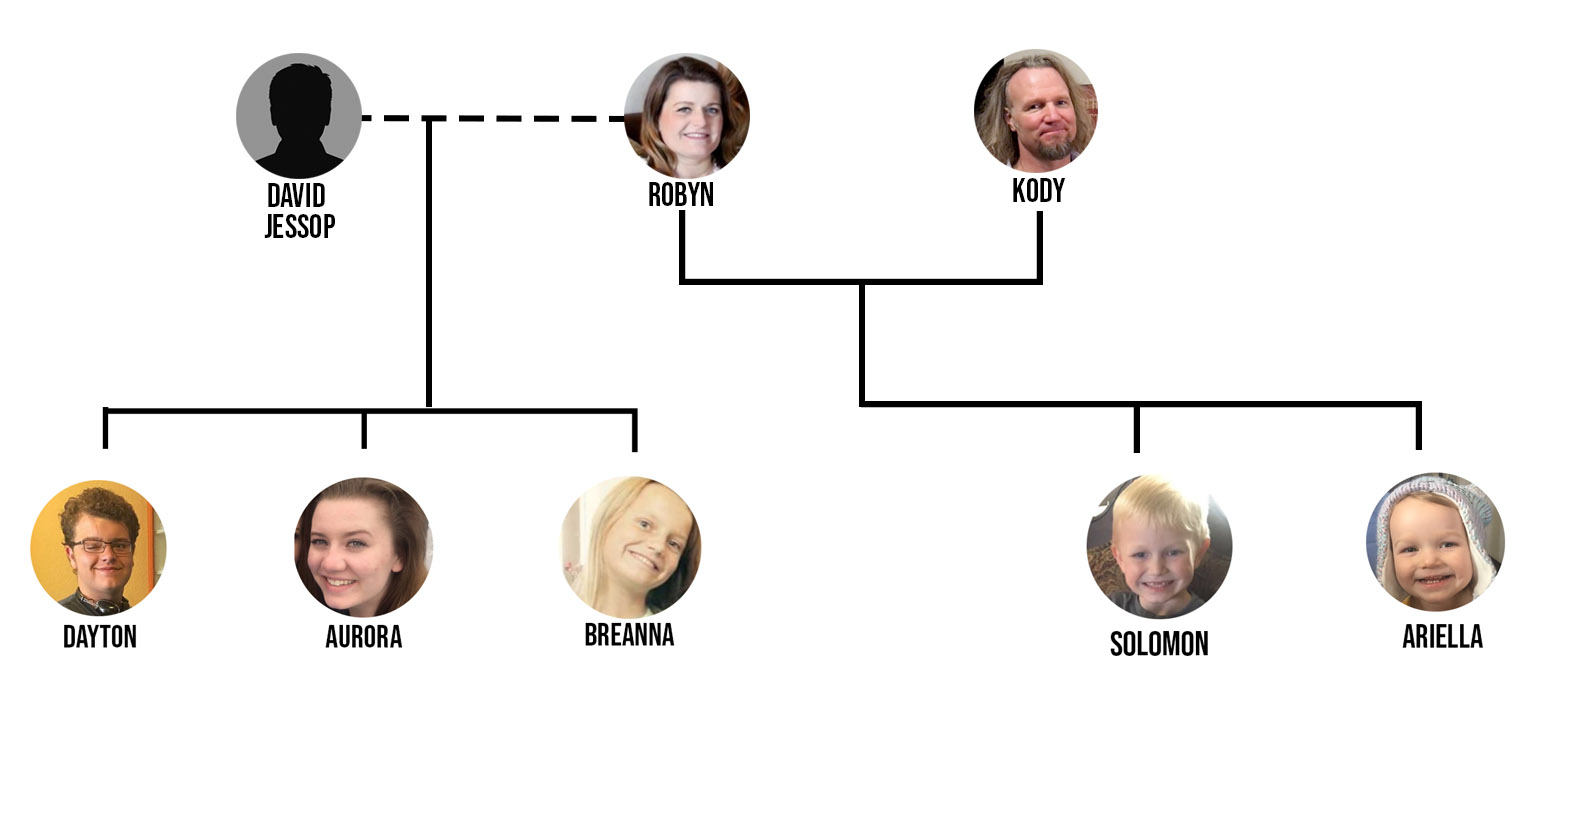 Sister Wives': A Breakdown of the Browns' Tangled Family Tree